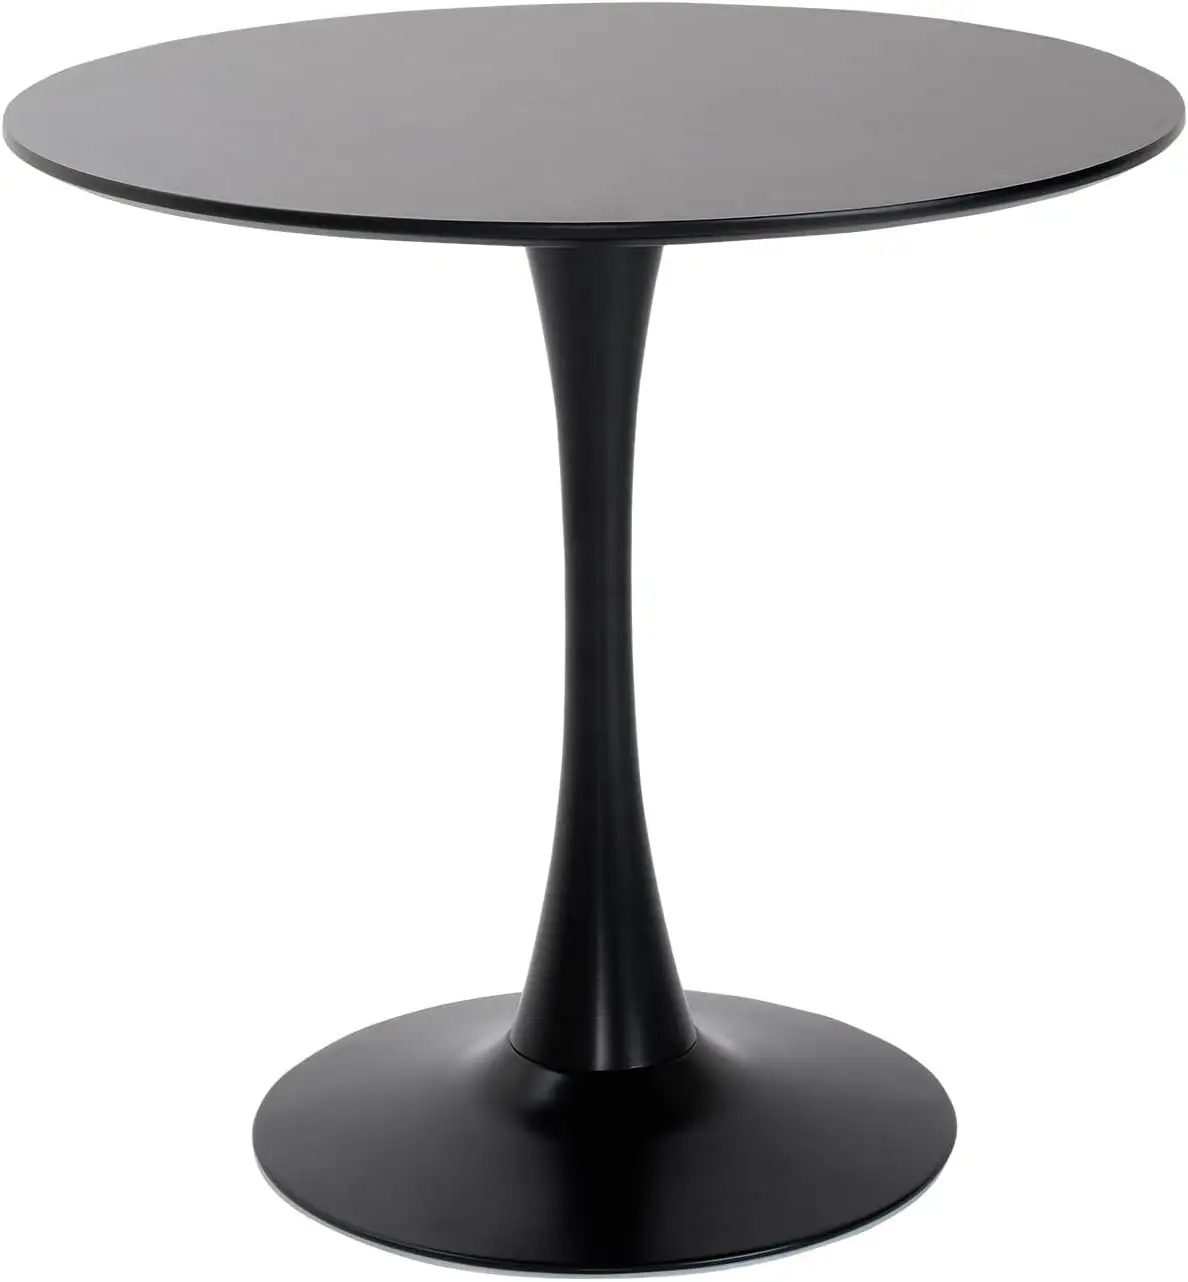 Vintage Pedestal Base Tulip Modern Design Mid-Century Small Round MDF Table for Kitchen Dining Room